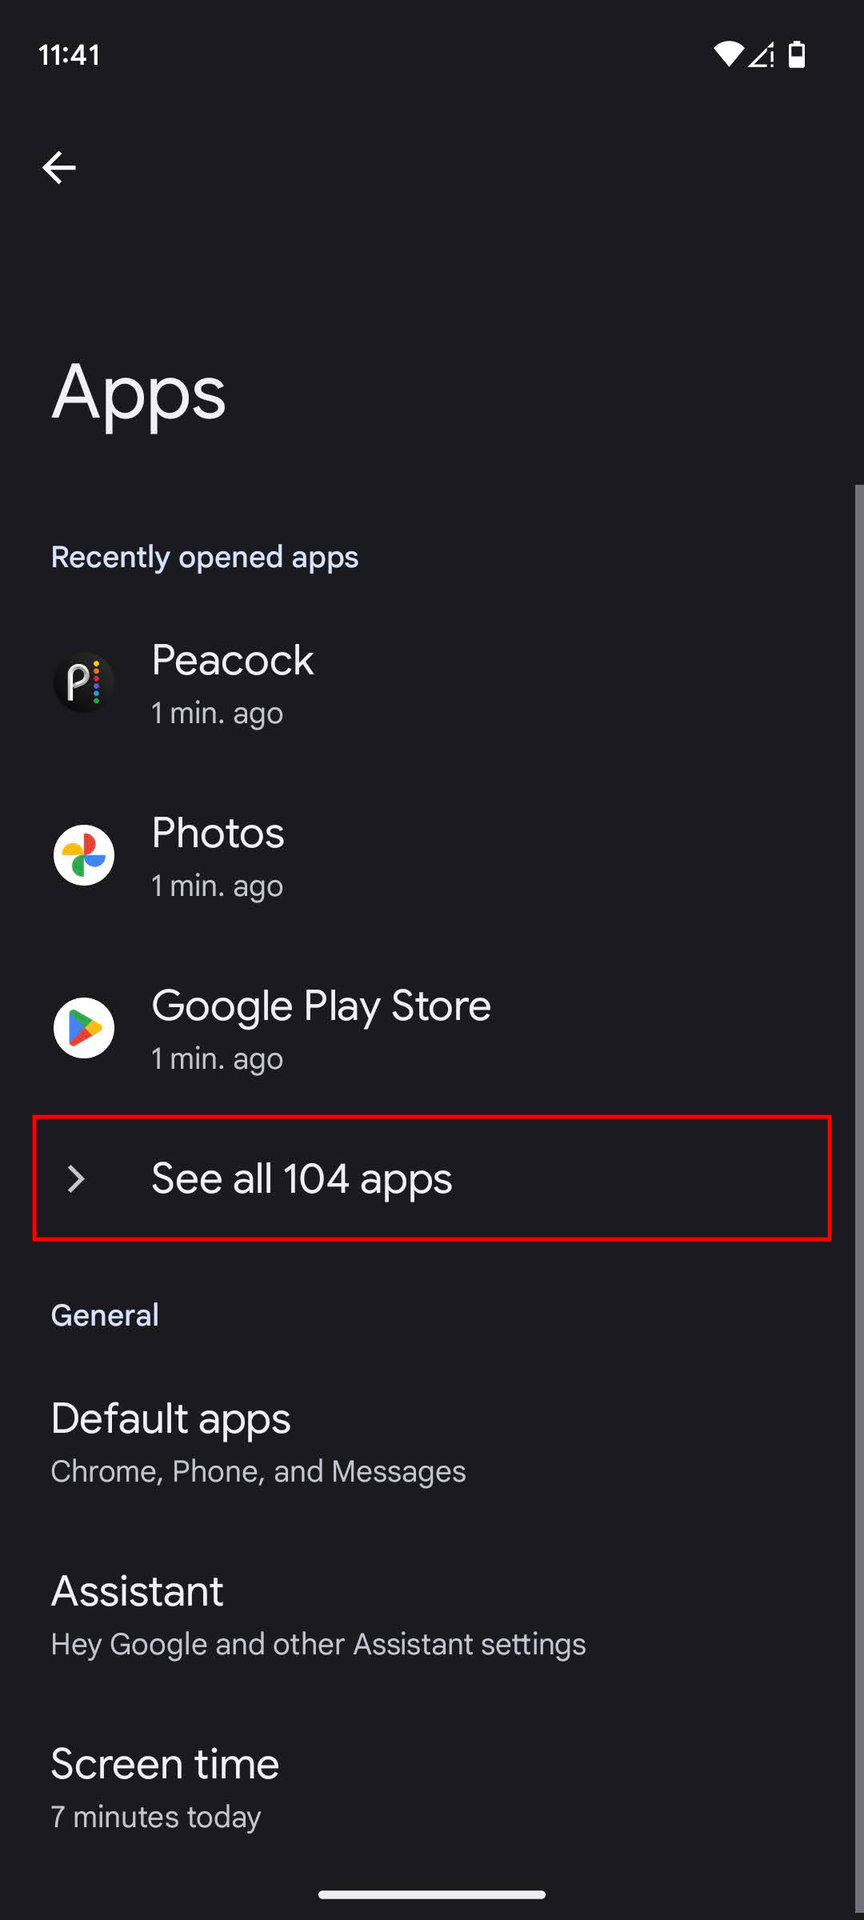 How to uninstall Peacock on Android 2